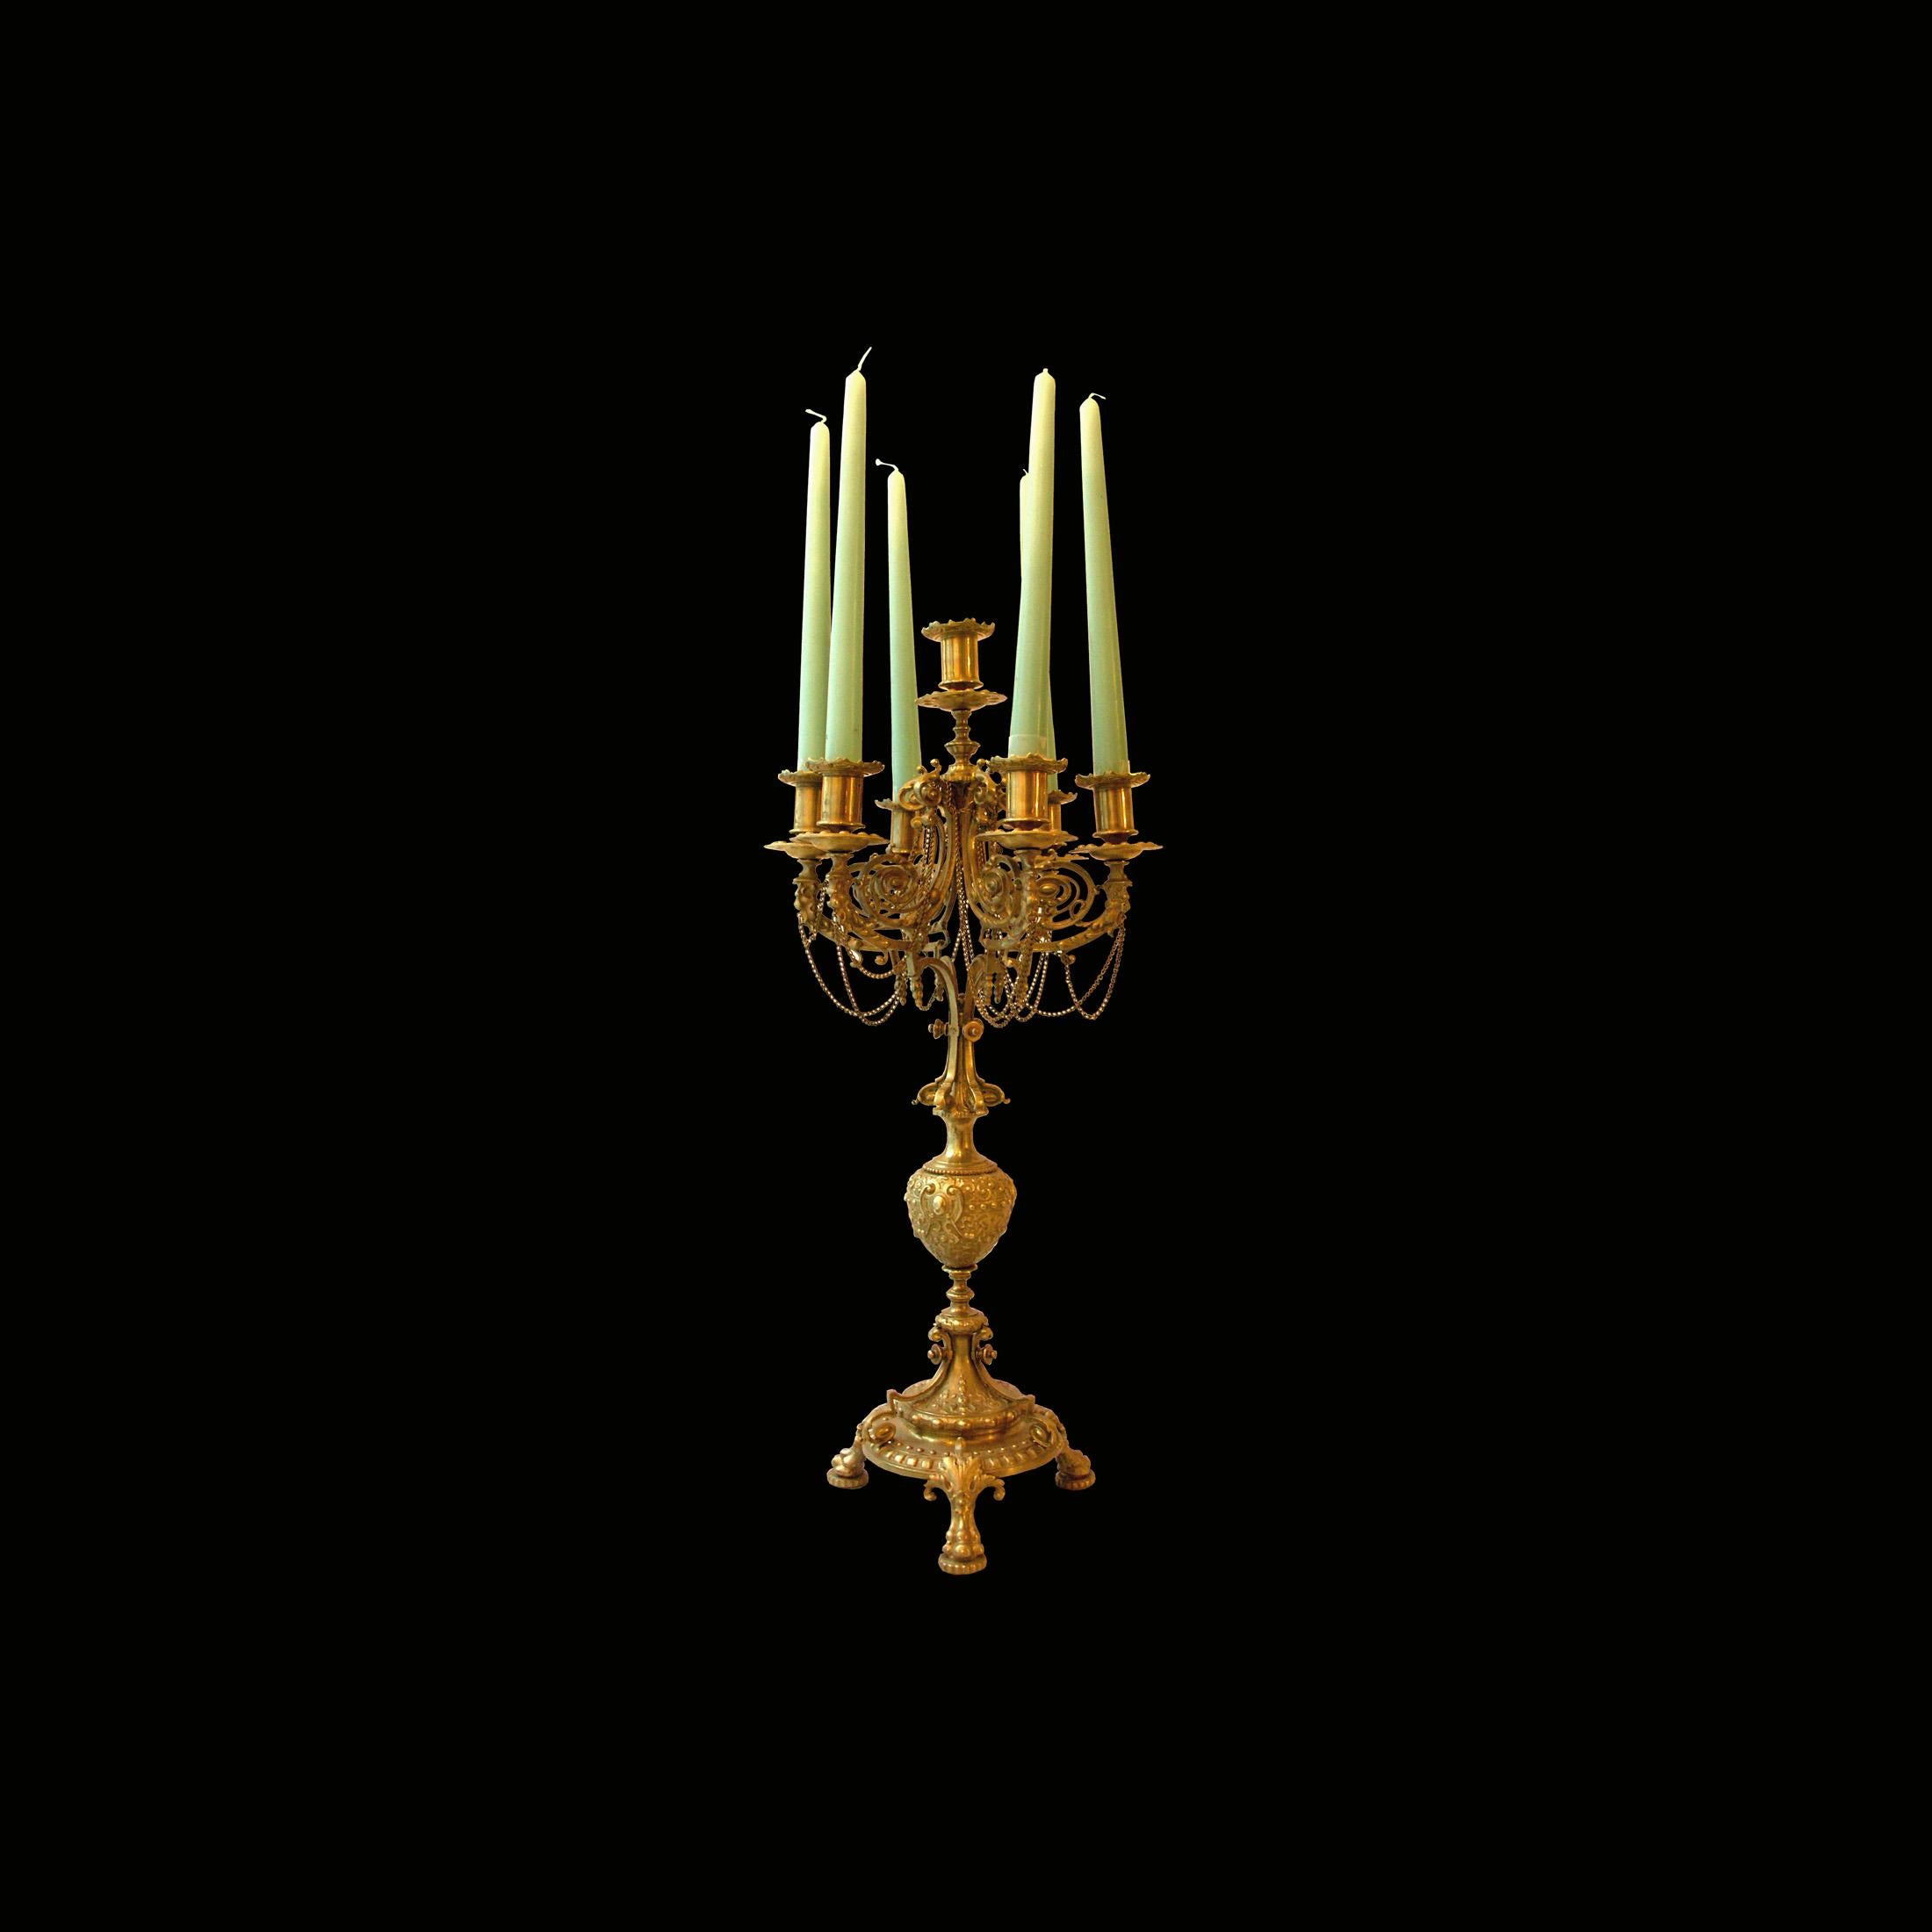 Gothic Revival Set of Original Historistic Guilided Bronze Candle Holder Louis Seize Style For Sale